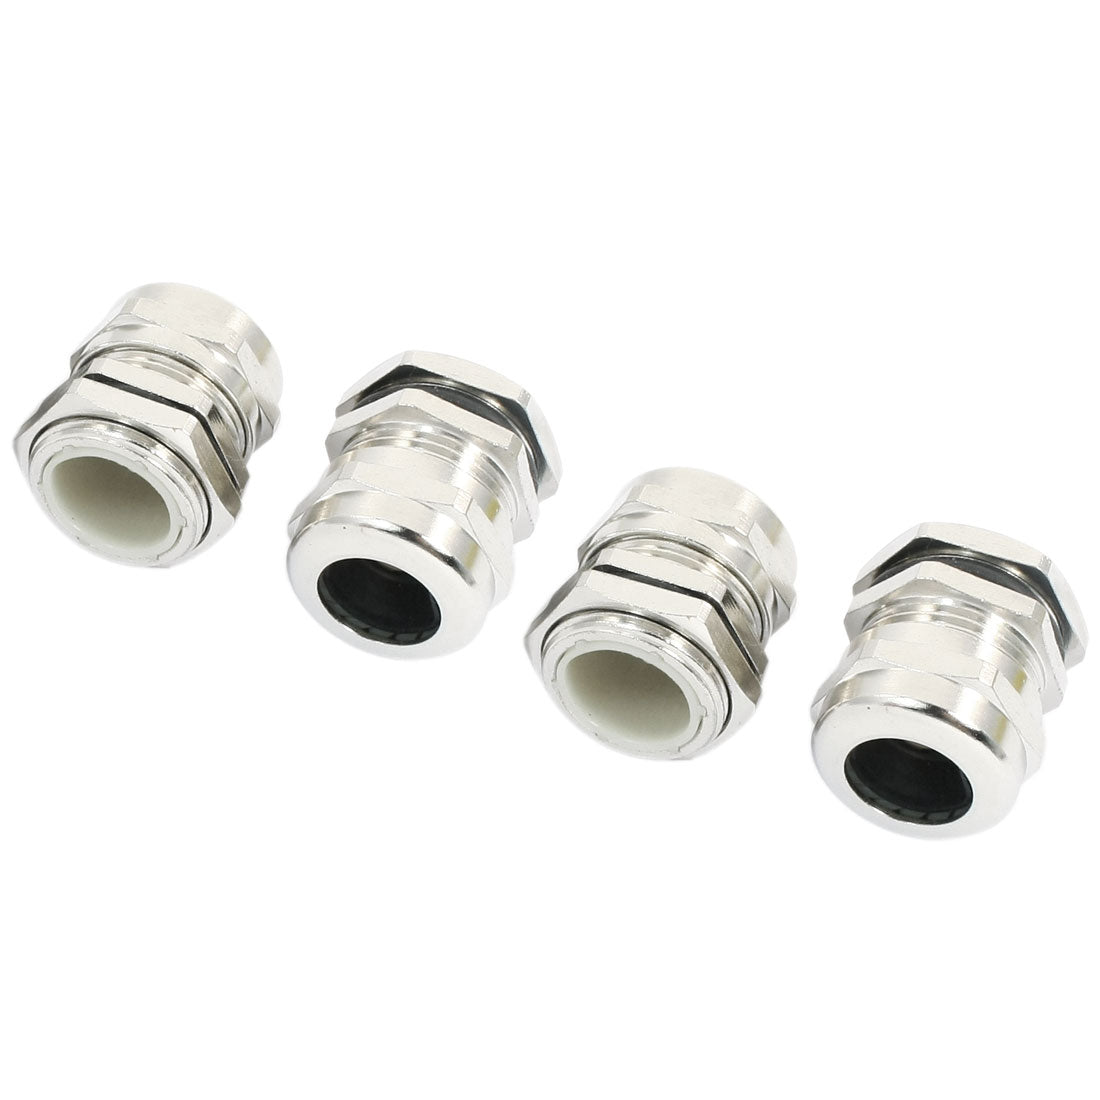 uxcell Uxcell 4Pcs PG16 Silver Tone Metal Waterproof Connector Fastener Locknut Stuffing Cable Gland for 10-14mm Wire